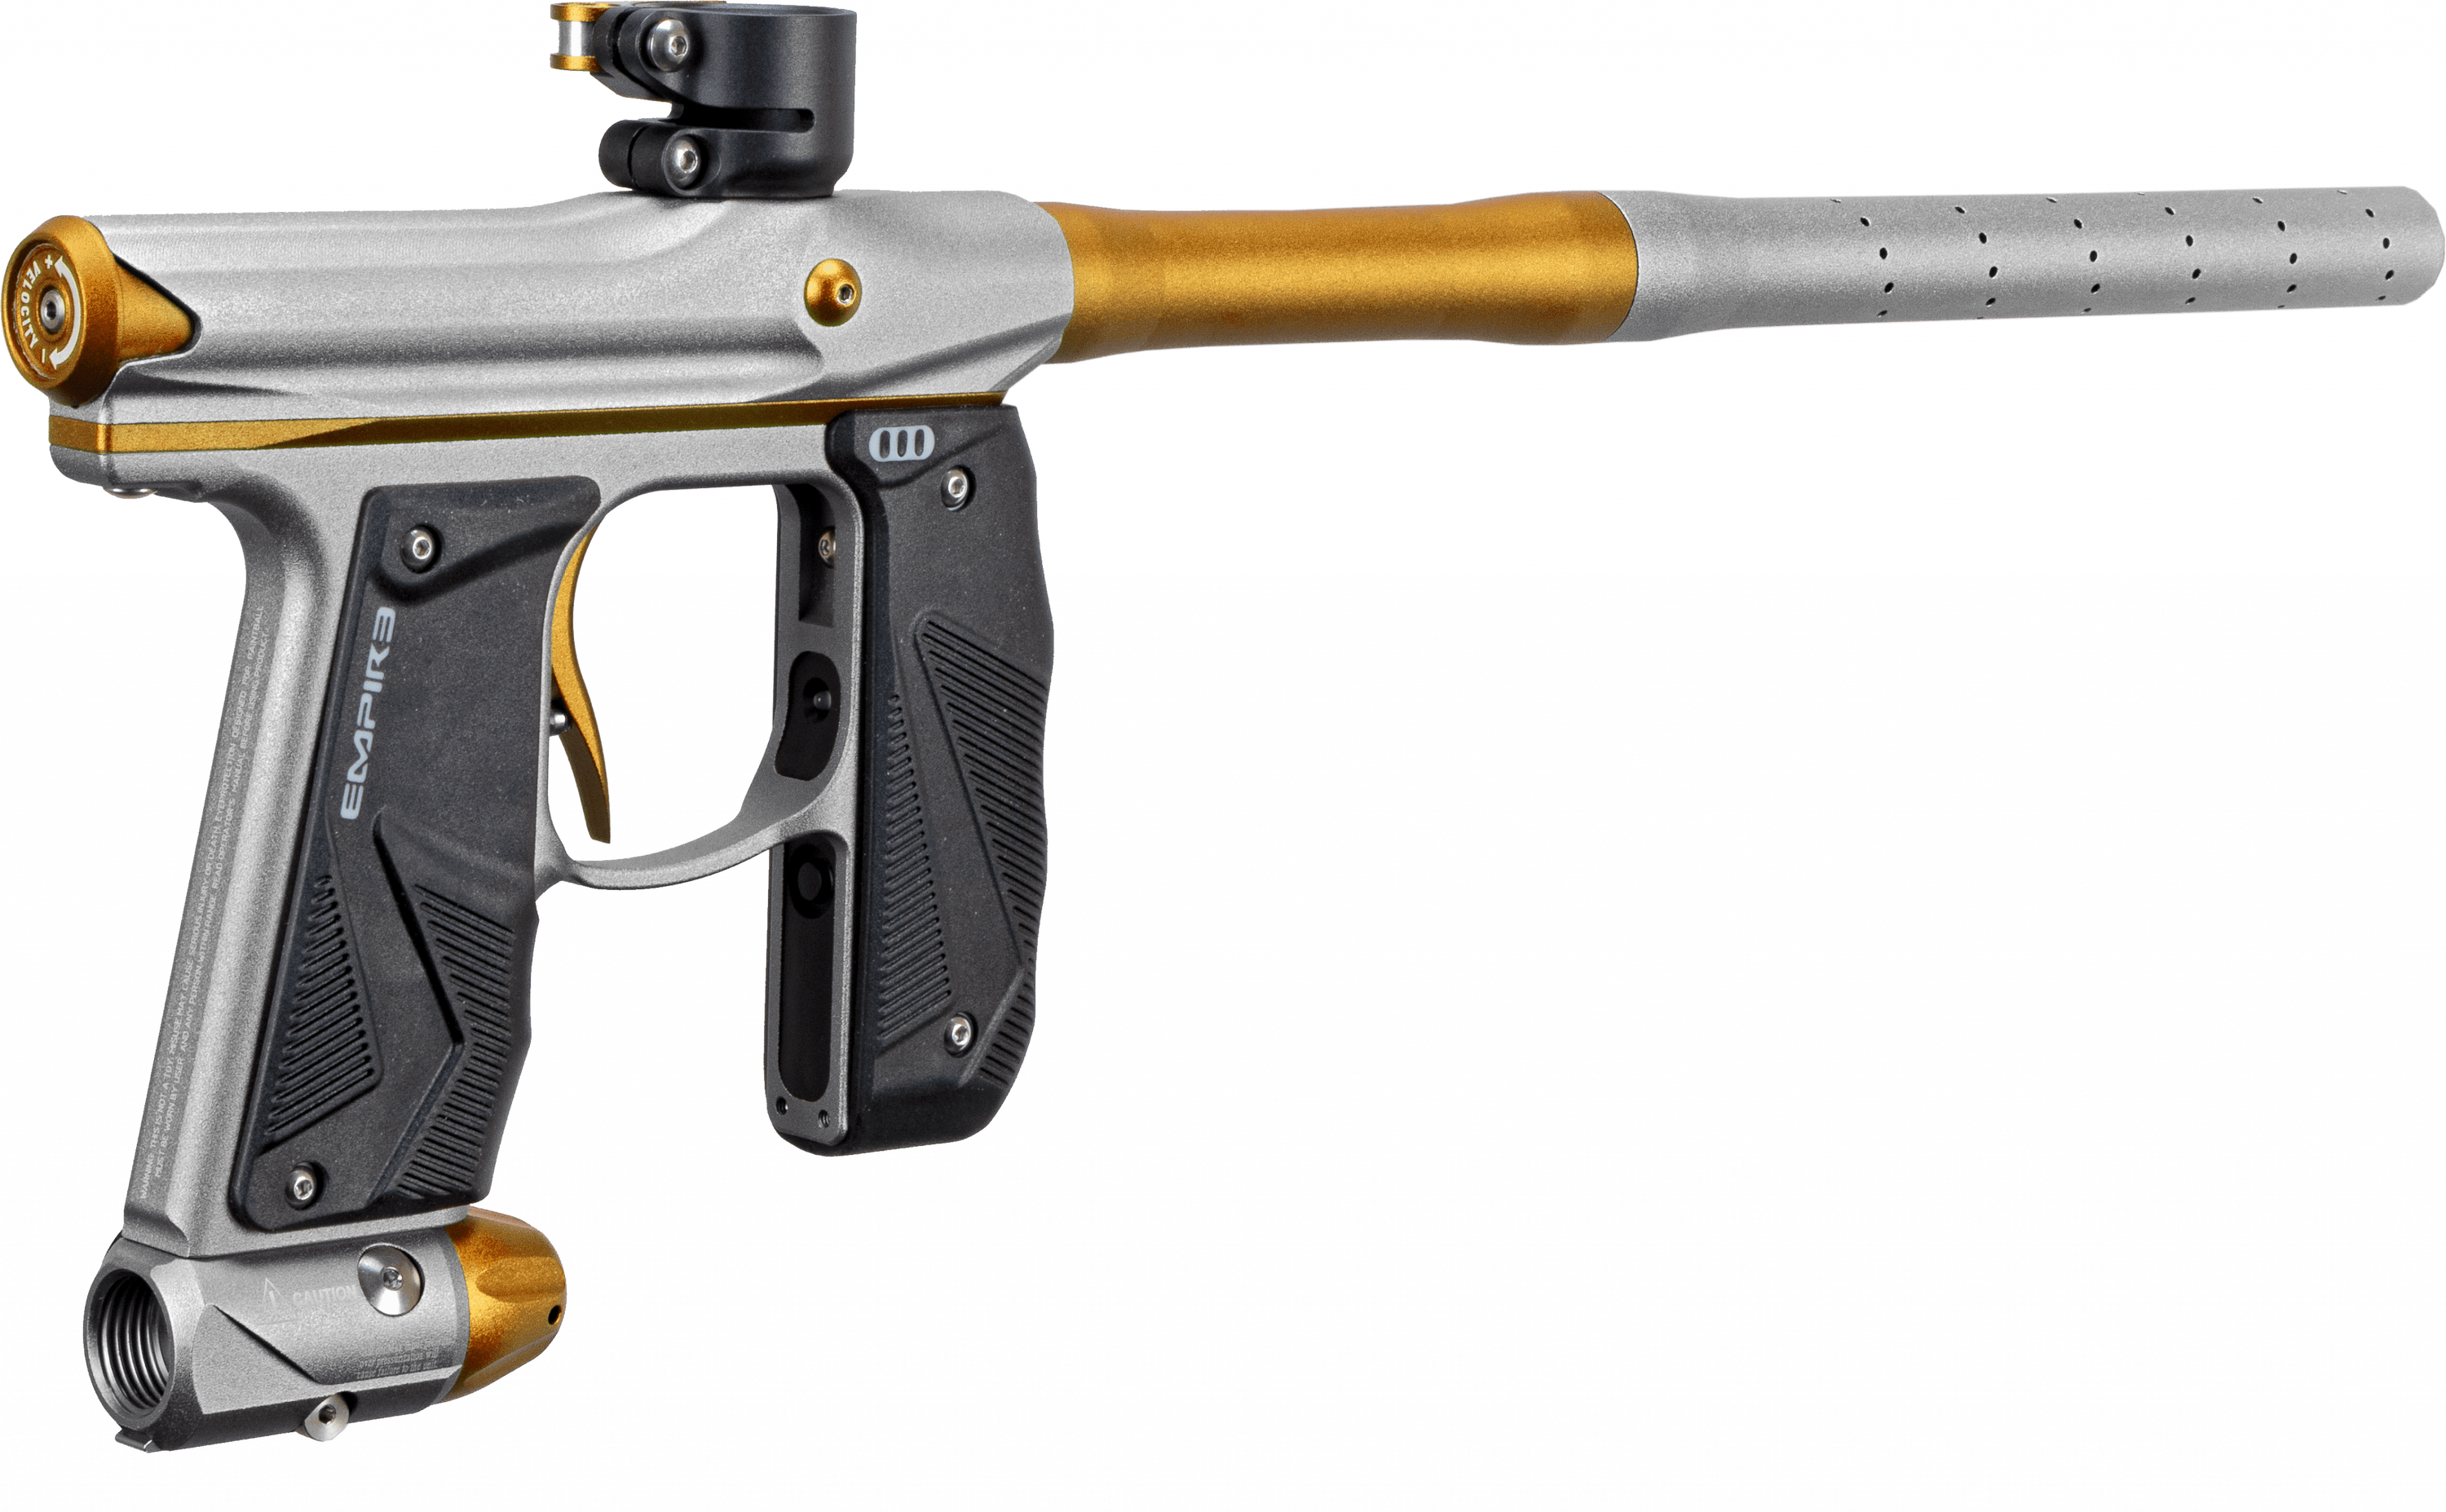 EMPIRE MINI GS PAINTBALL GUN W/ TWO PIECE BARREL- DUST GOLD/DUST SILVER - Eminent Paintball And Airsoft